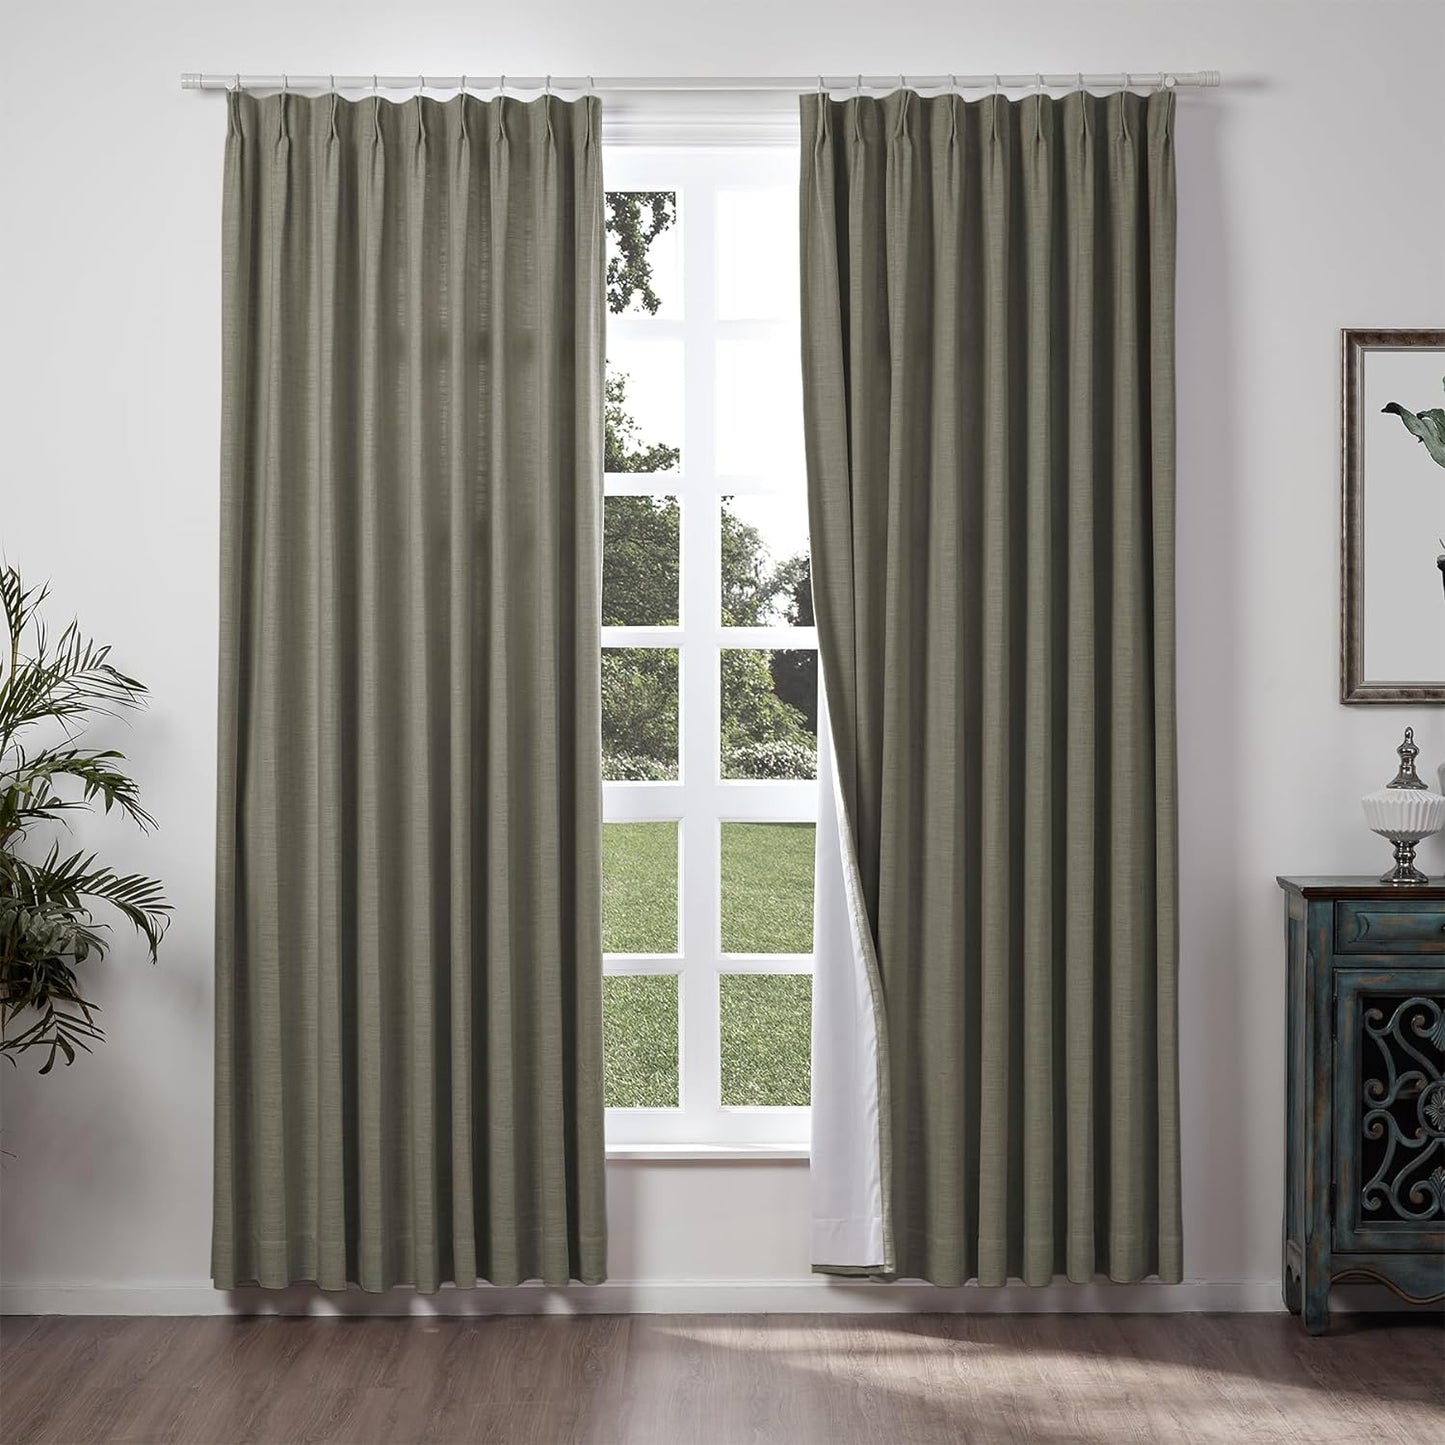 Chadmade 50" W X 84" L Polyester Linen Drape with Blackout Lining Pinch Pleat Curtain for Sliding Door Patio Door Living Room Bedroom, (1 Panel) Beige White Liz Collection  ChadMade Sepia (14) 120Wx96L 